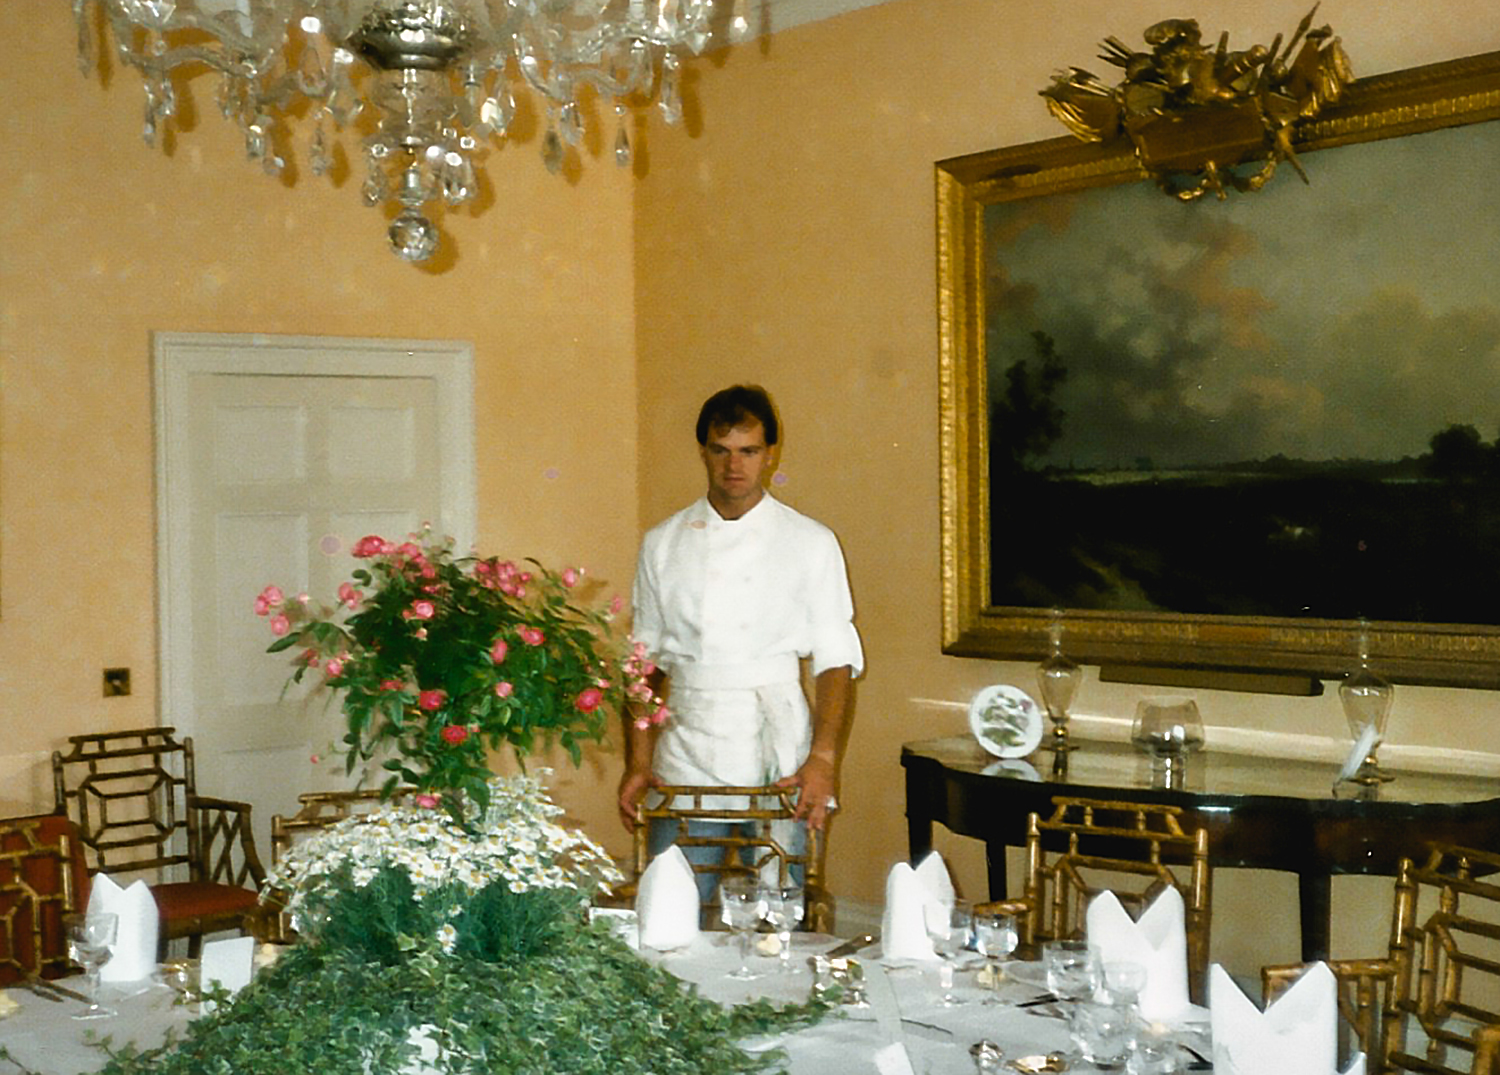 Enrico Derflingher – young man standing in an opulent dining room, wearing a white chef’s uniform and adjusting golden chairs around a large table.